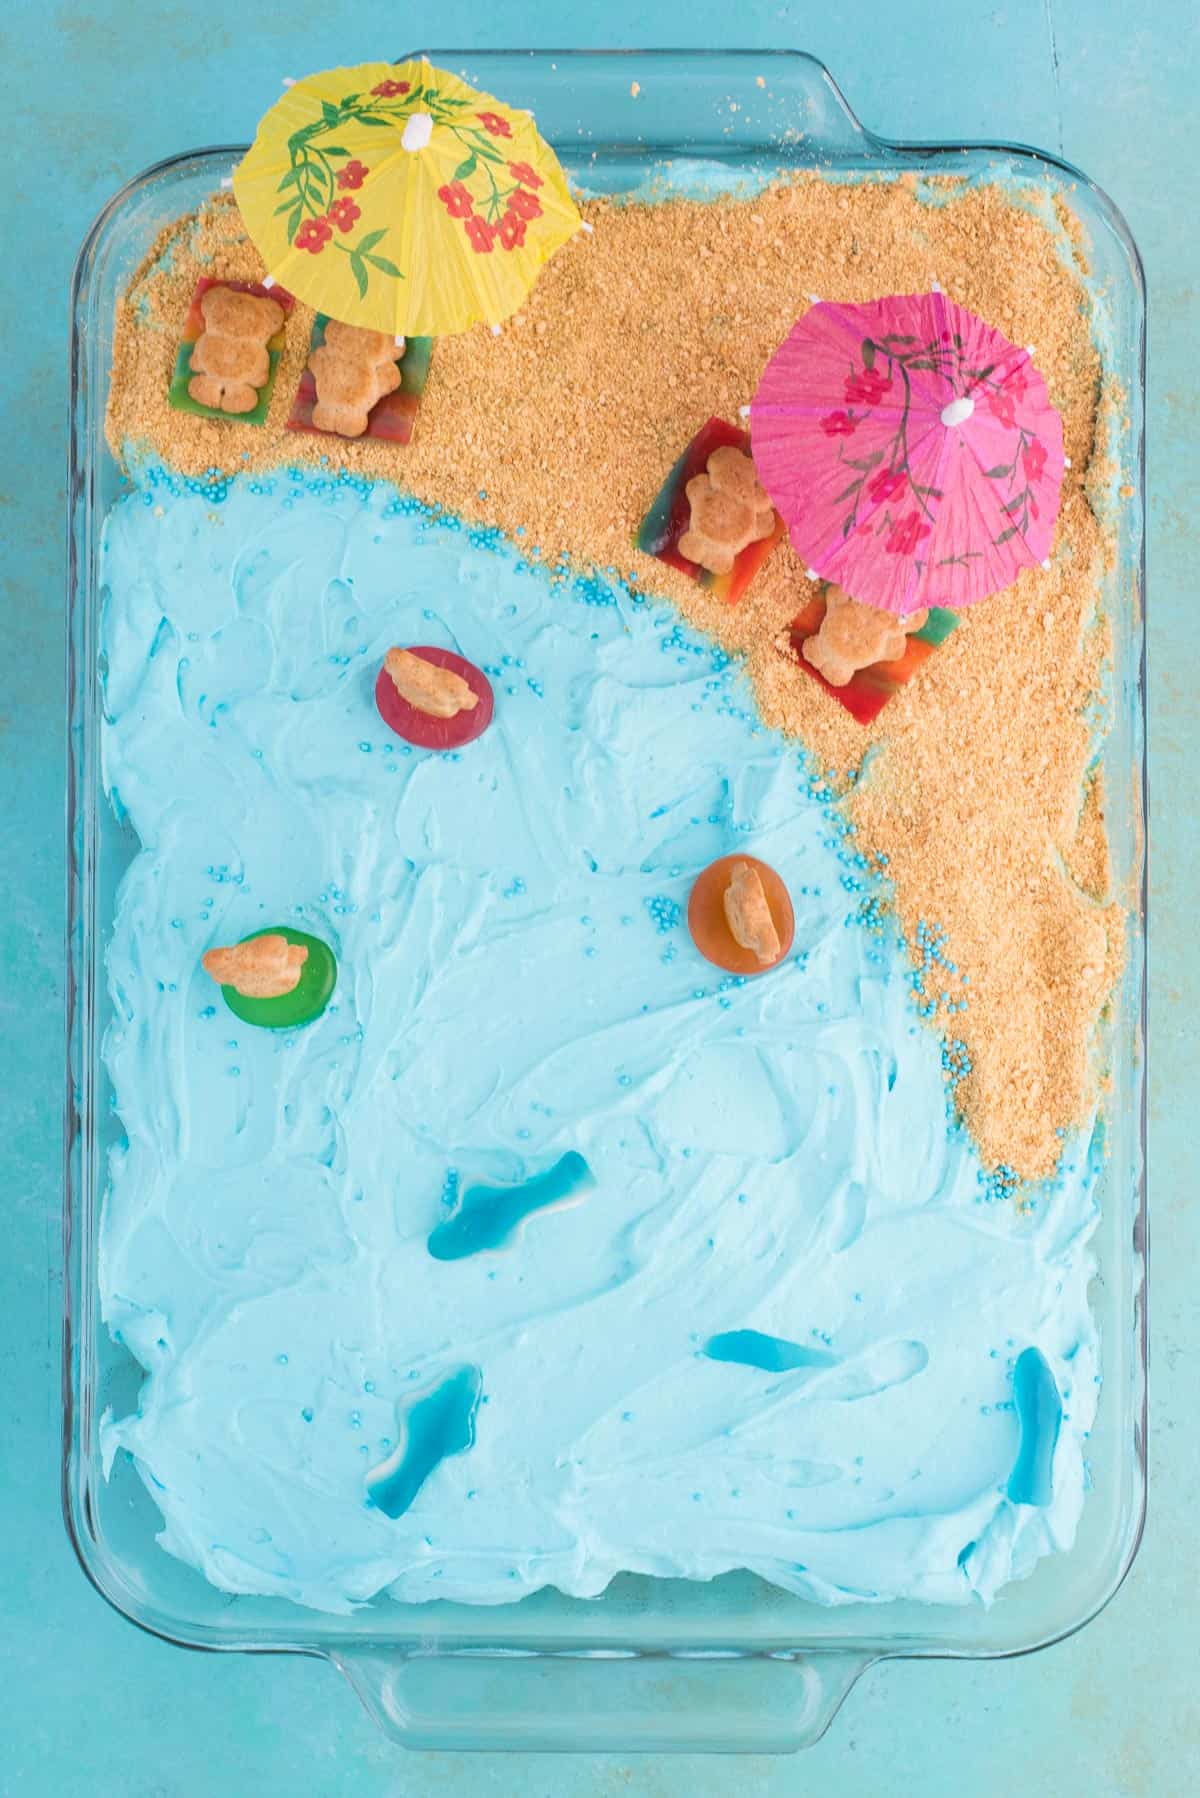 Aerial photograph of beach theme cake on blue background